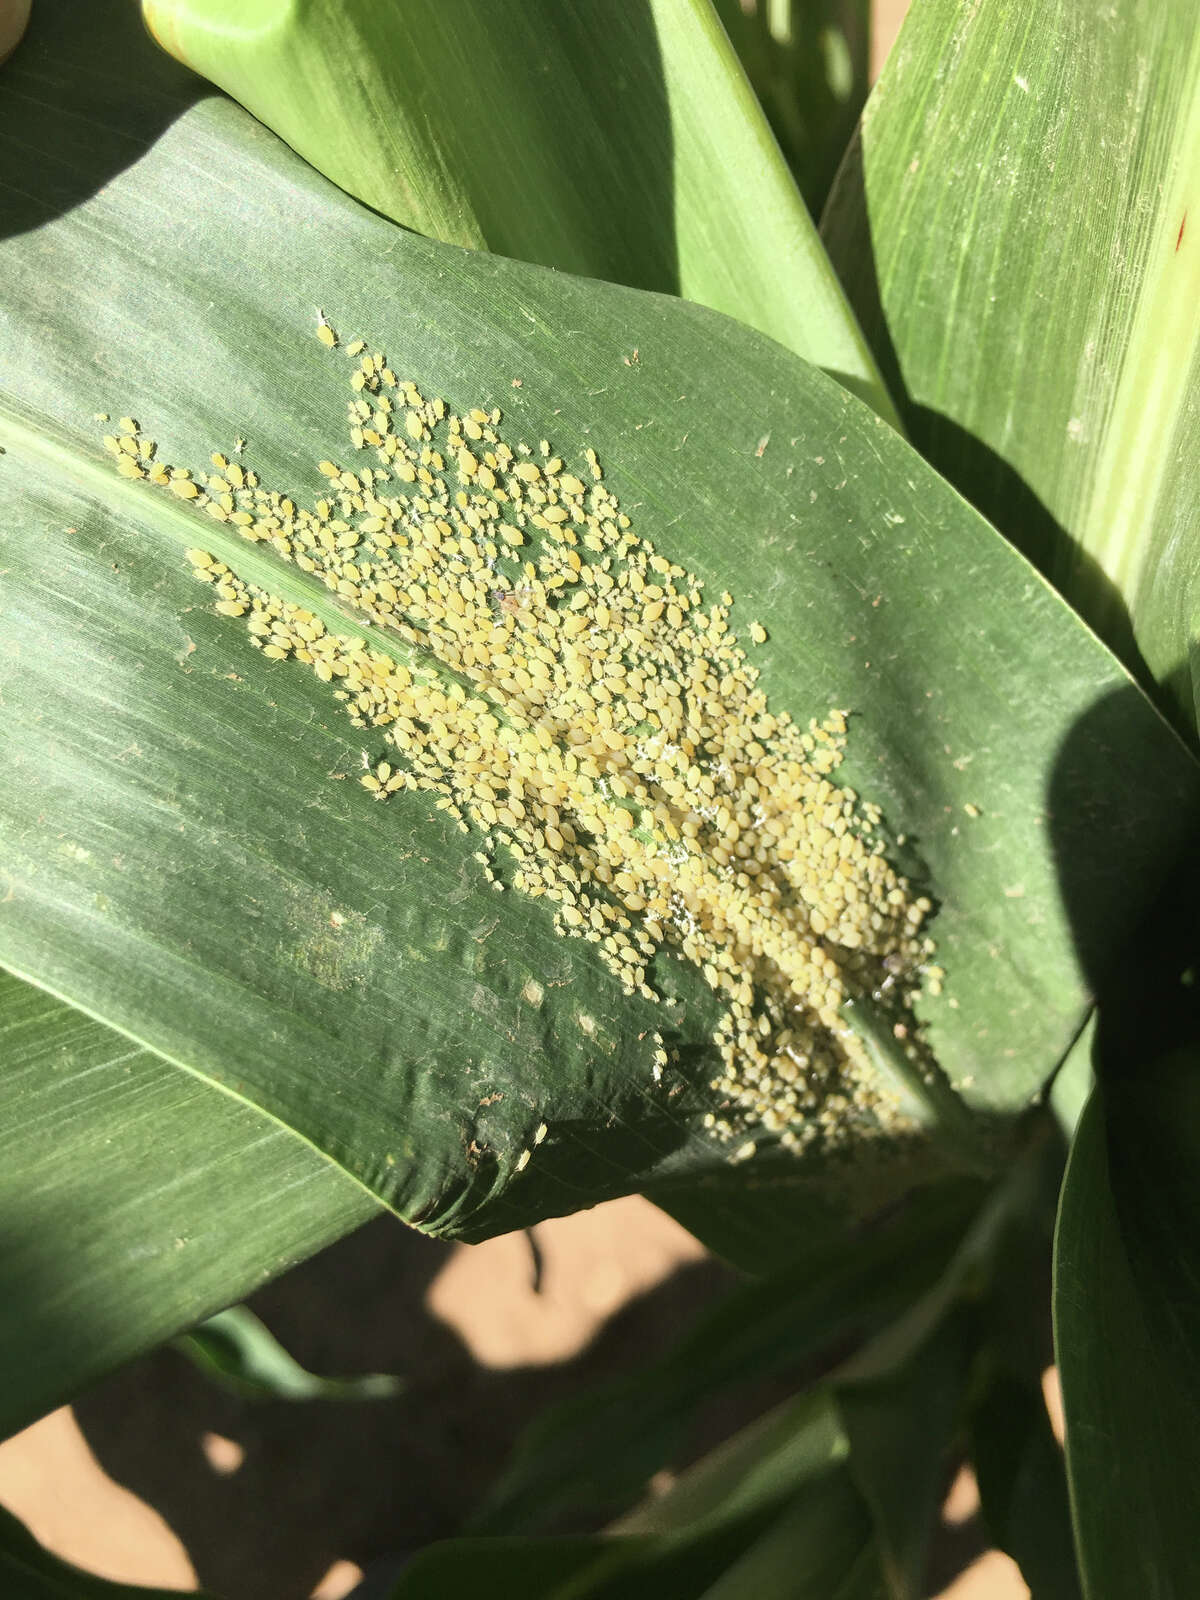 Colonies of sugarcane aphids can establish at a rapid pace once a plant is infested and untreated.